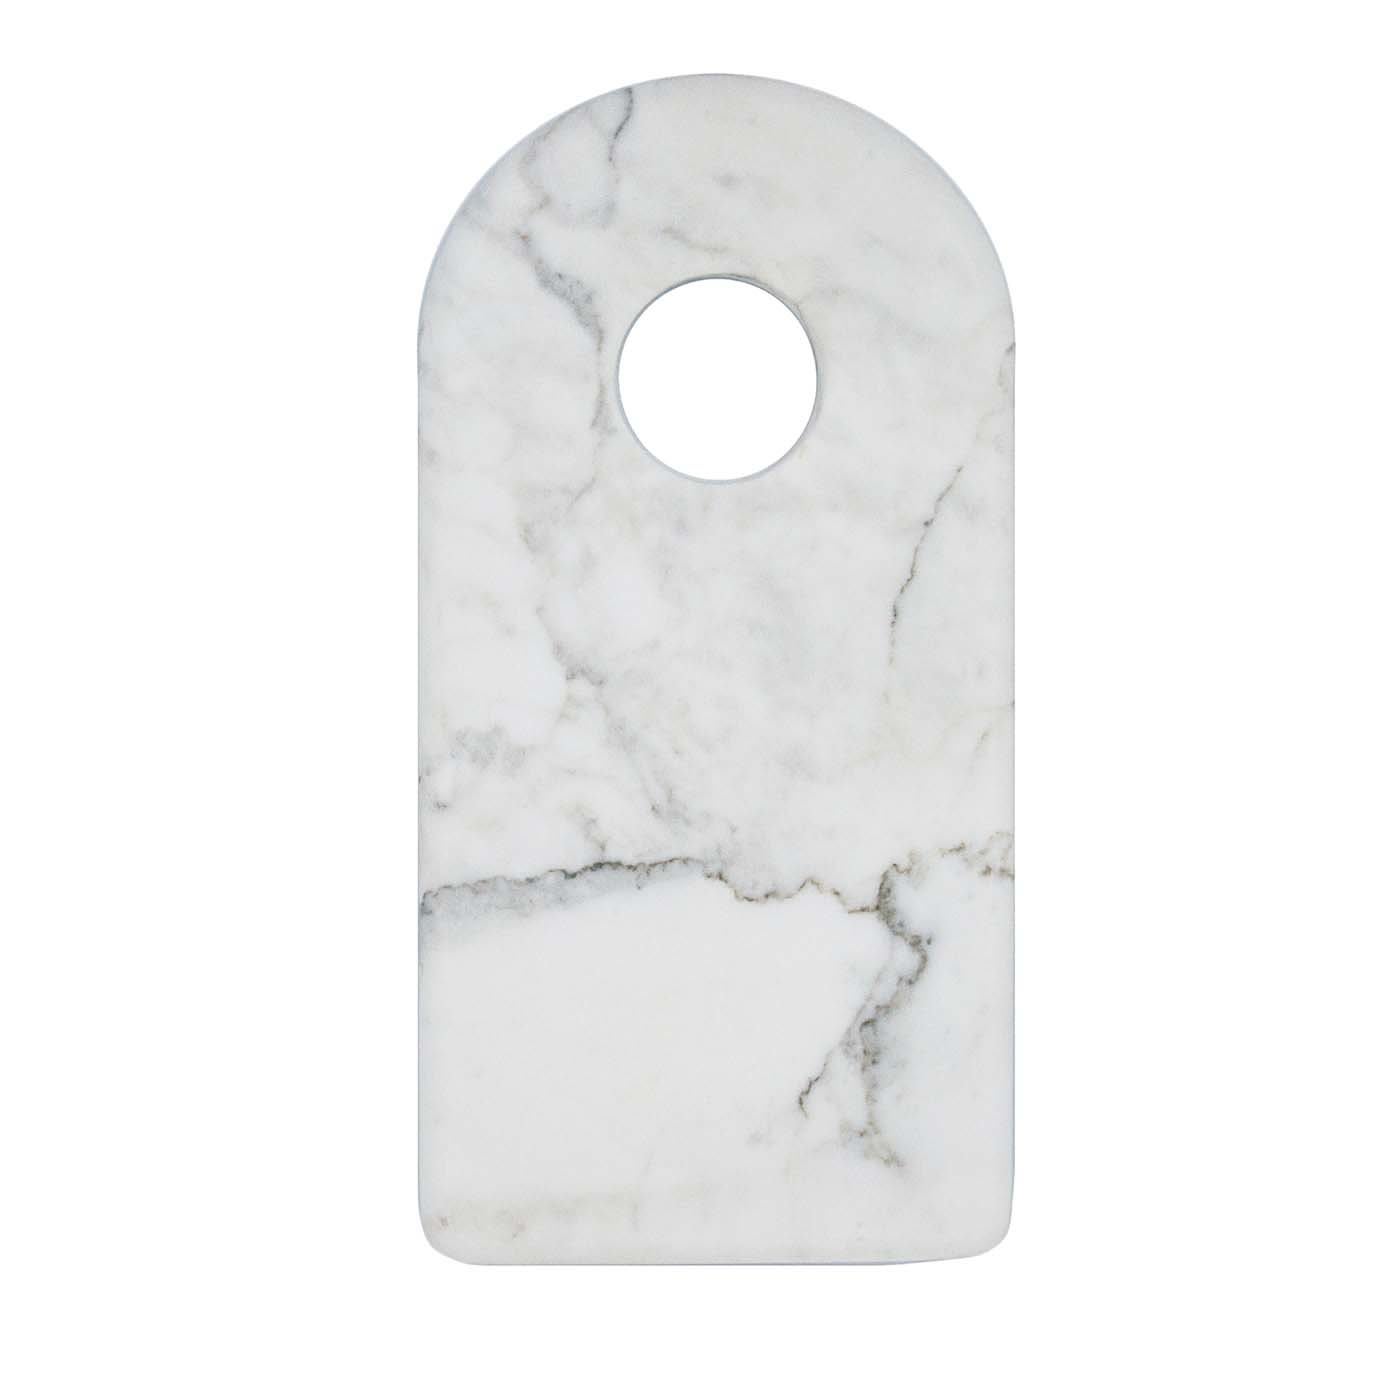 White Marble Cutting Board with Hole - FiammettaV Home Collection